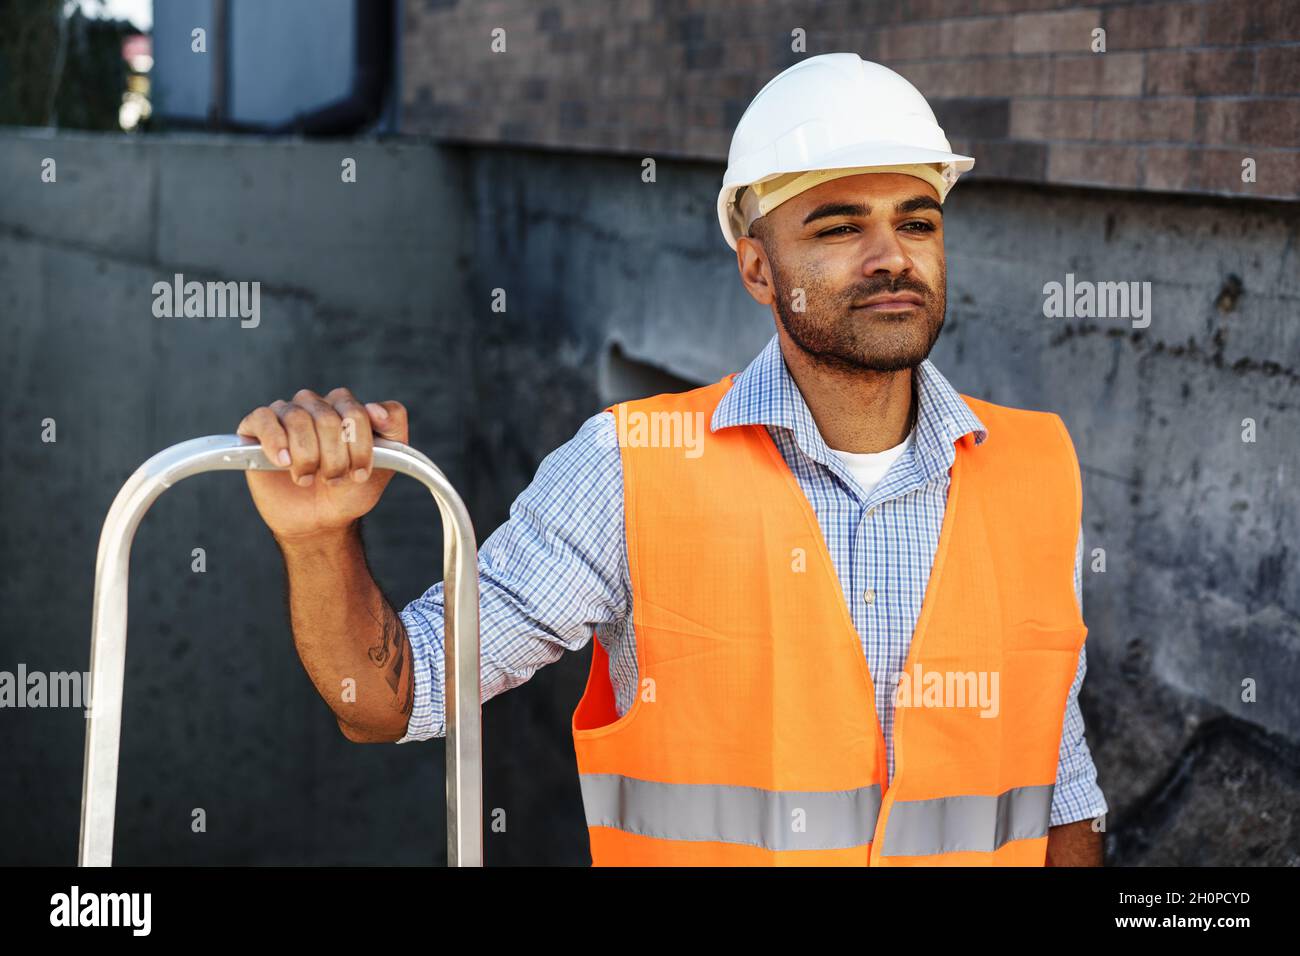 Professional builder carrying metal ladder, close up Stock Photo